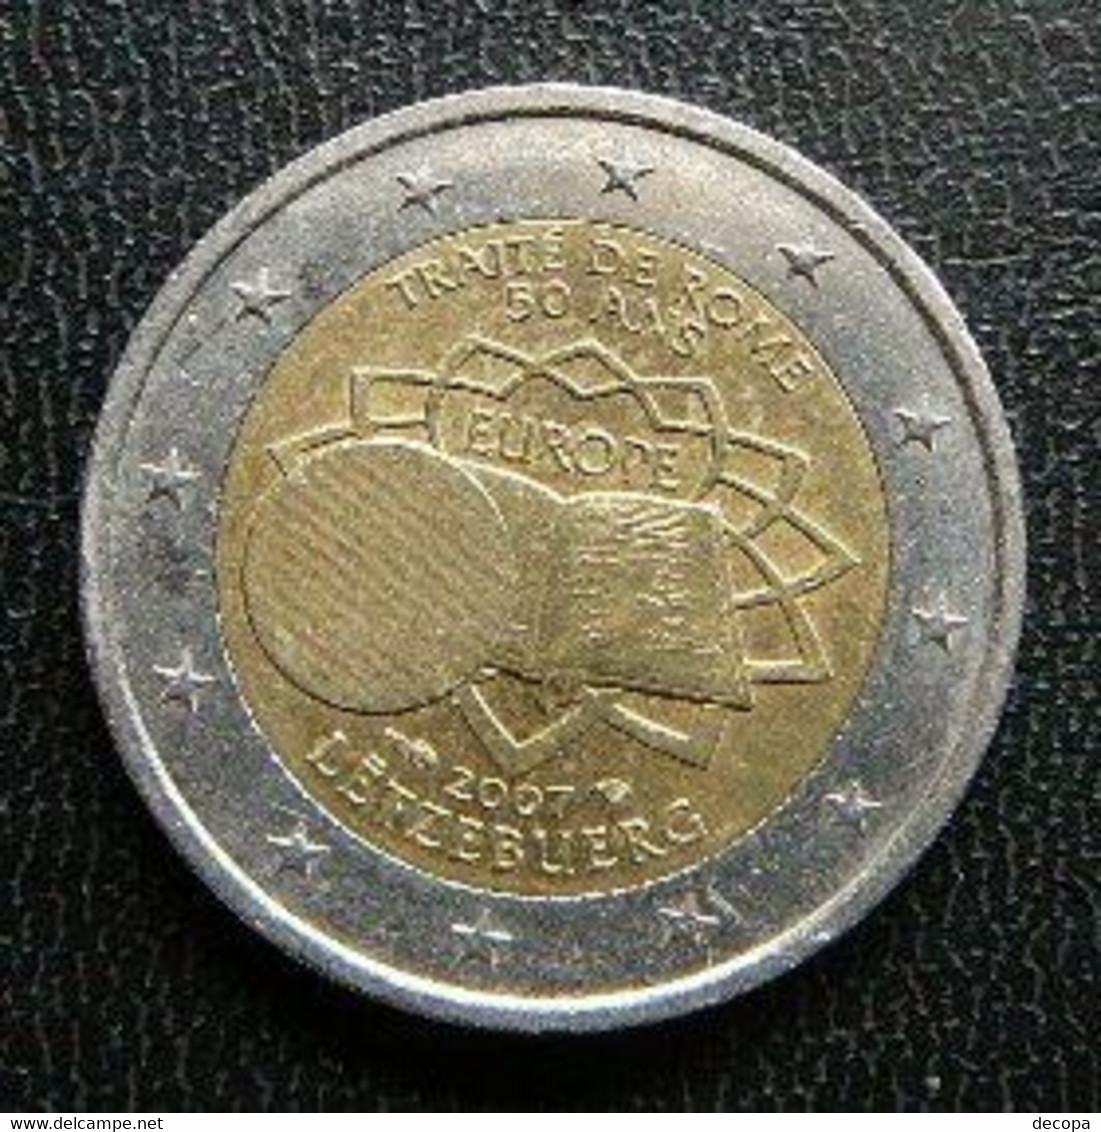 Luxemburg  - Luxembourg   2 EURO 2007     Speciale Uitgave - Commemorative - Luxembourg